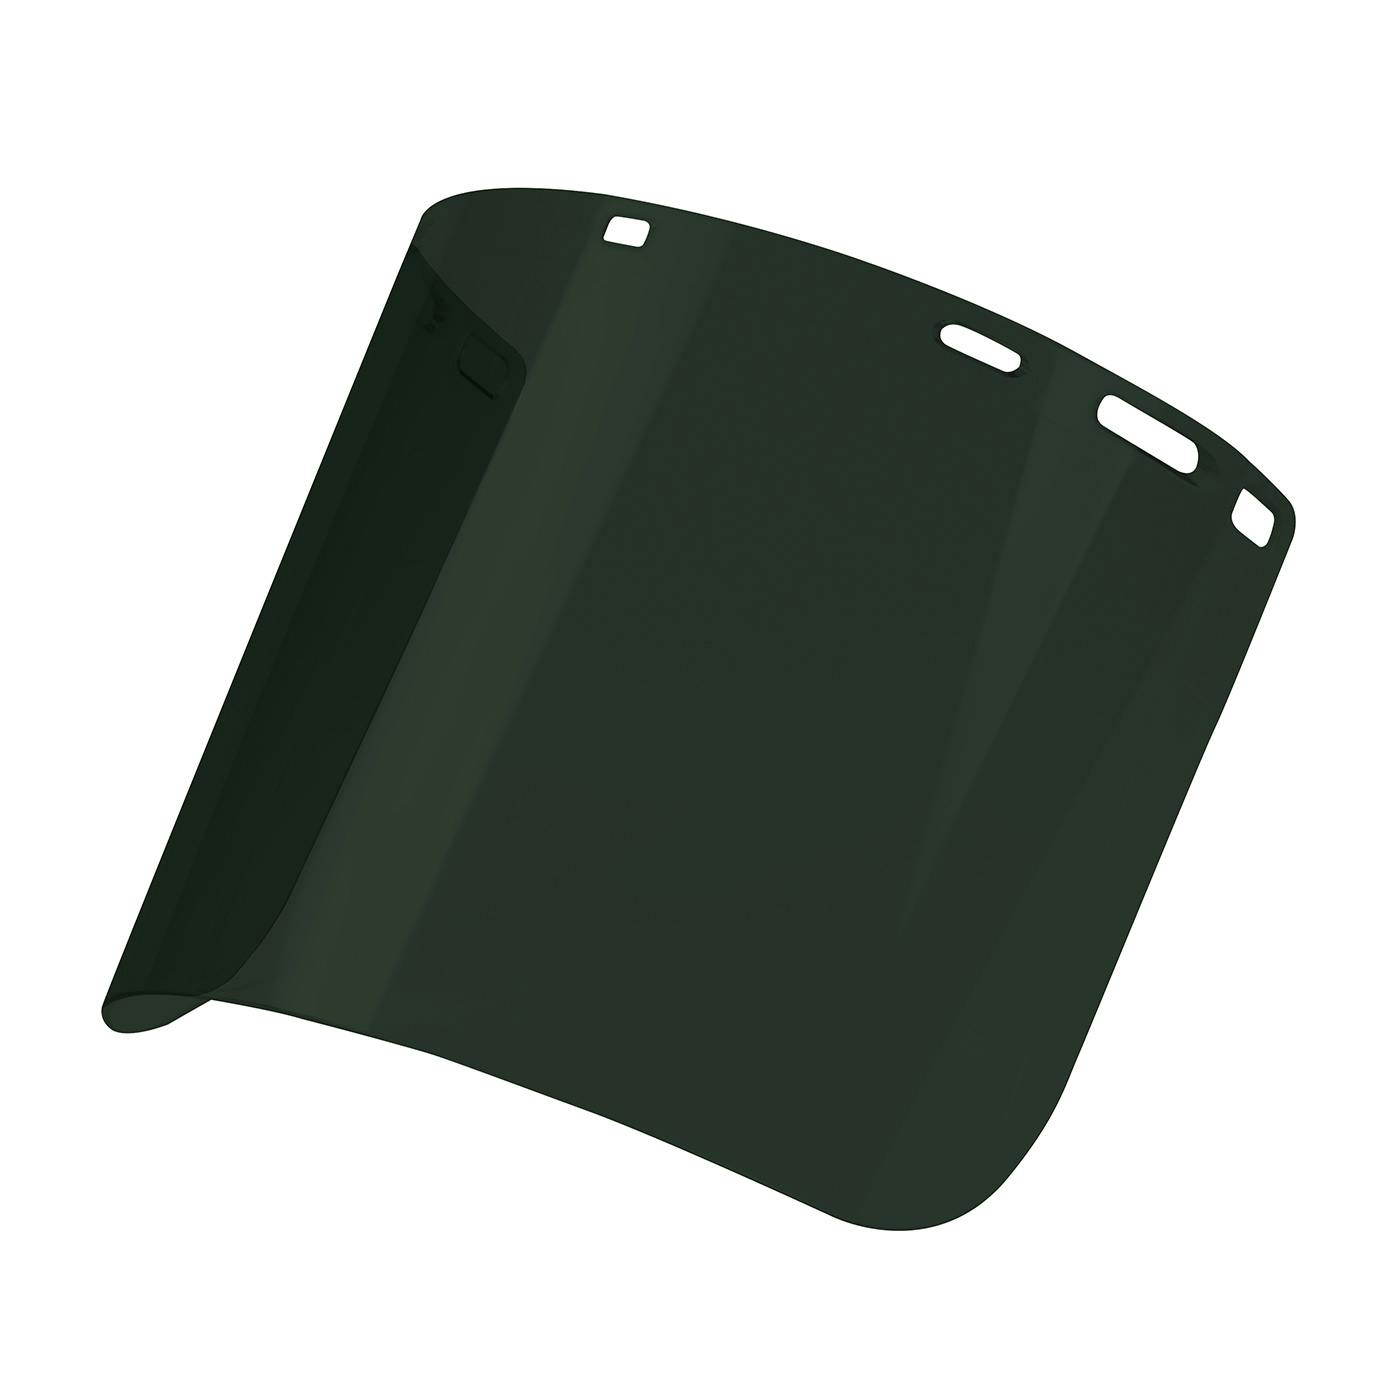 Uncoated Polycarbonate Safety Visor - IR 5.0, Green (251-01-7315) - OS